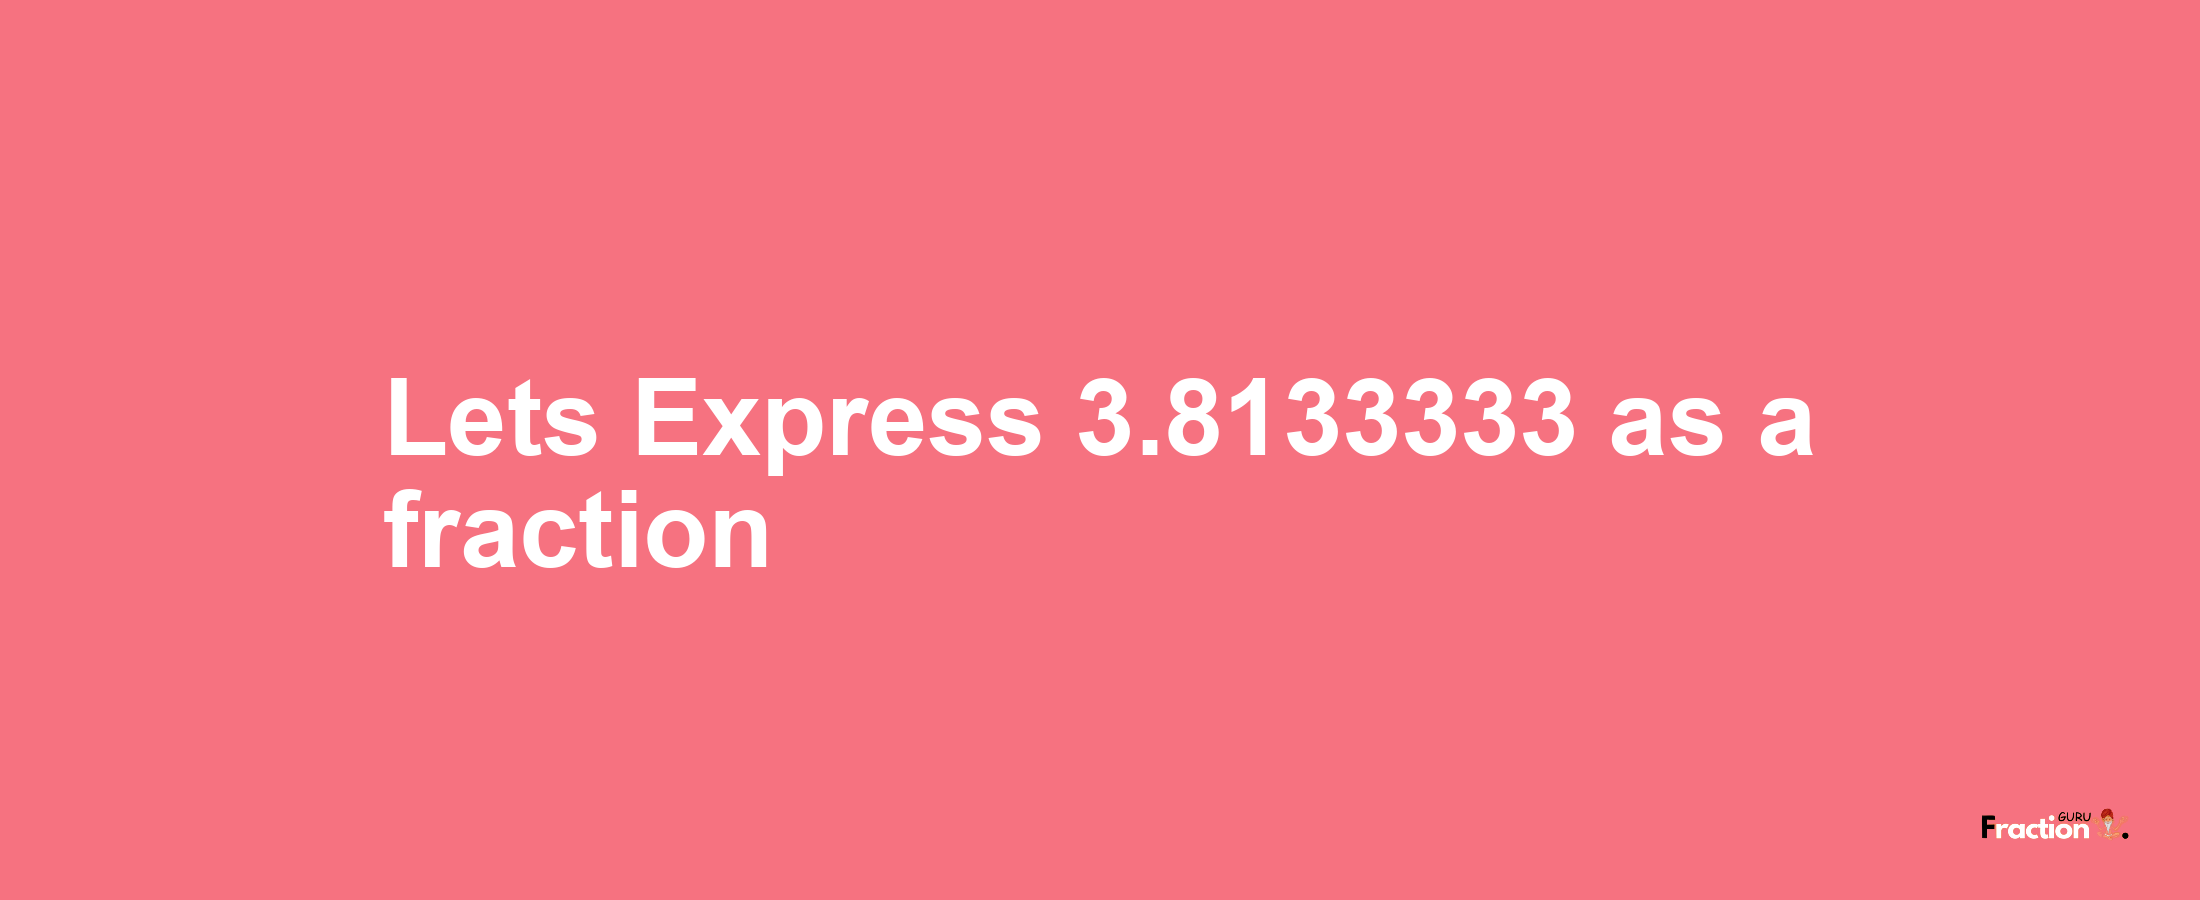 Lets Express 3.8133333 as afraction